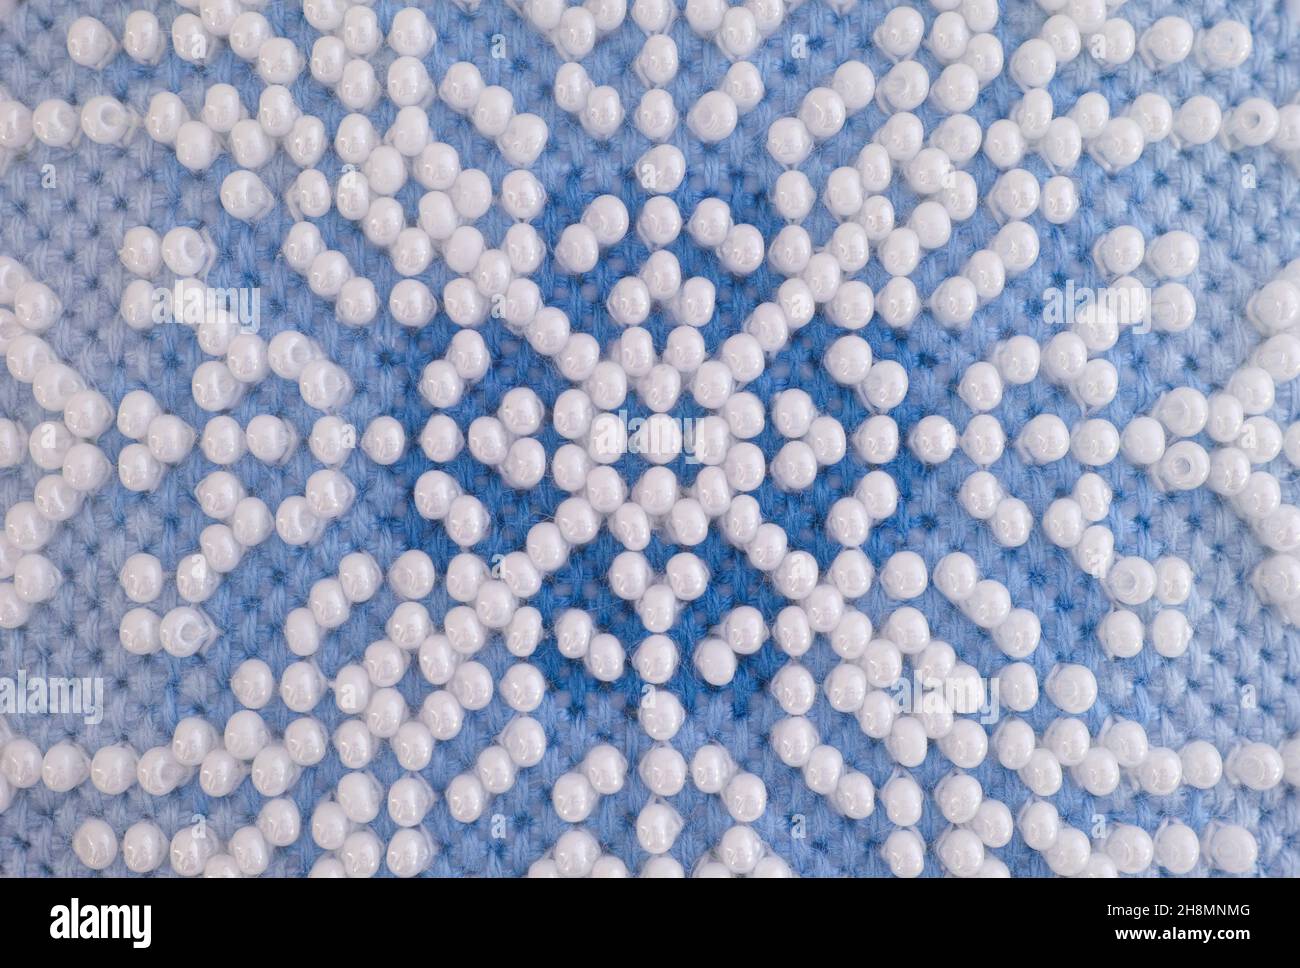 65,800+ White Beads Stock Photos, Pictures & Royalty-Free Images